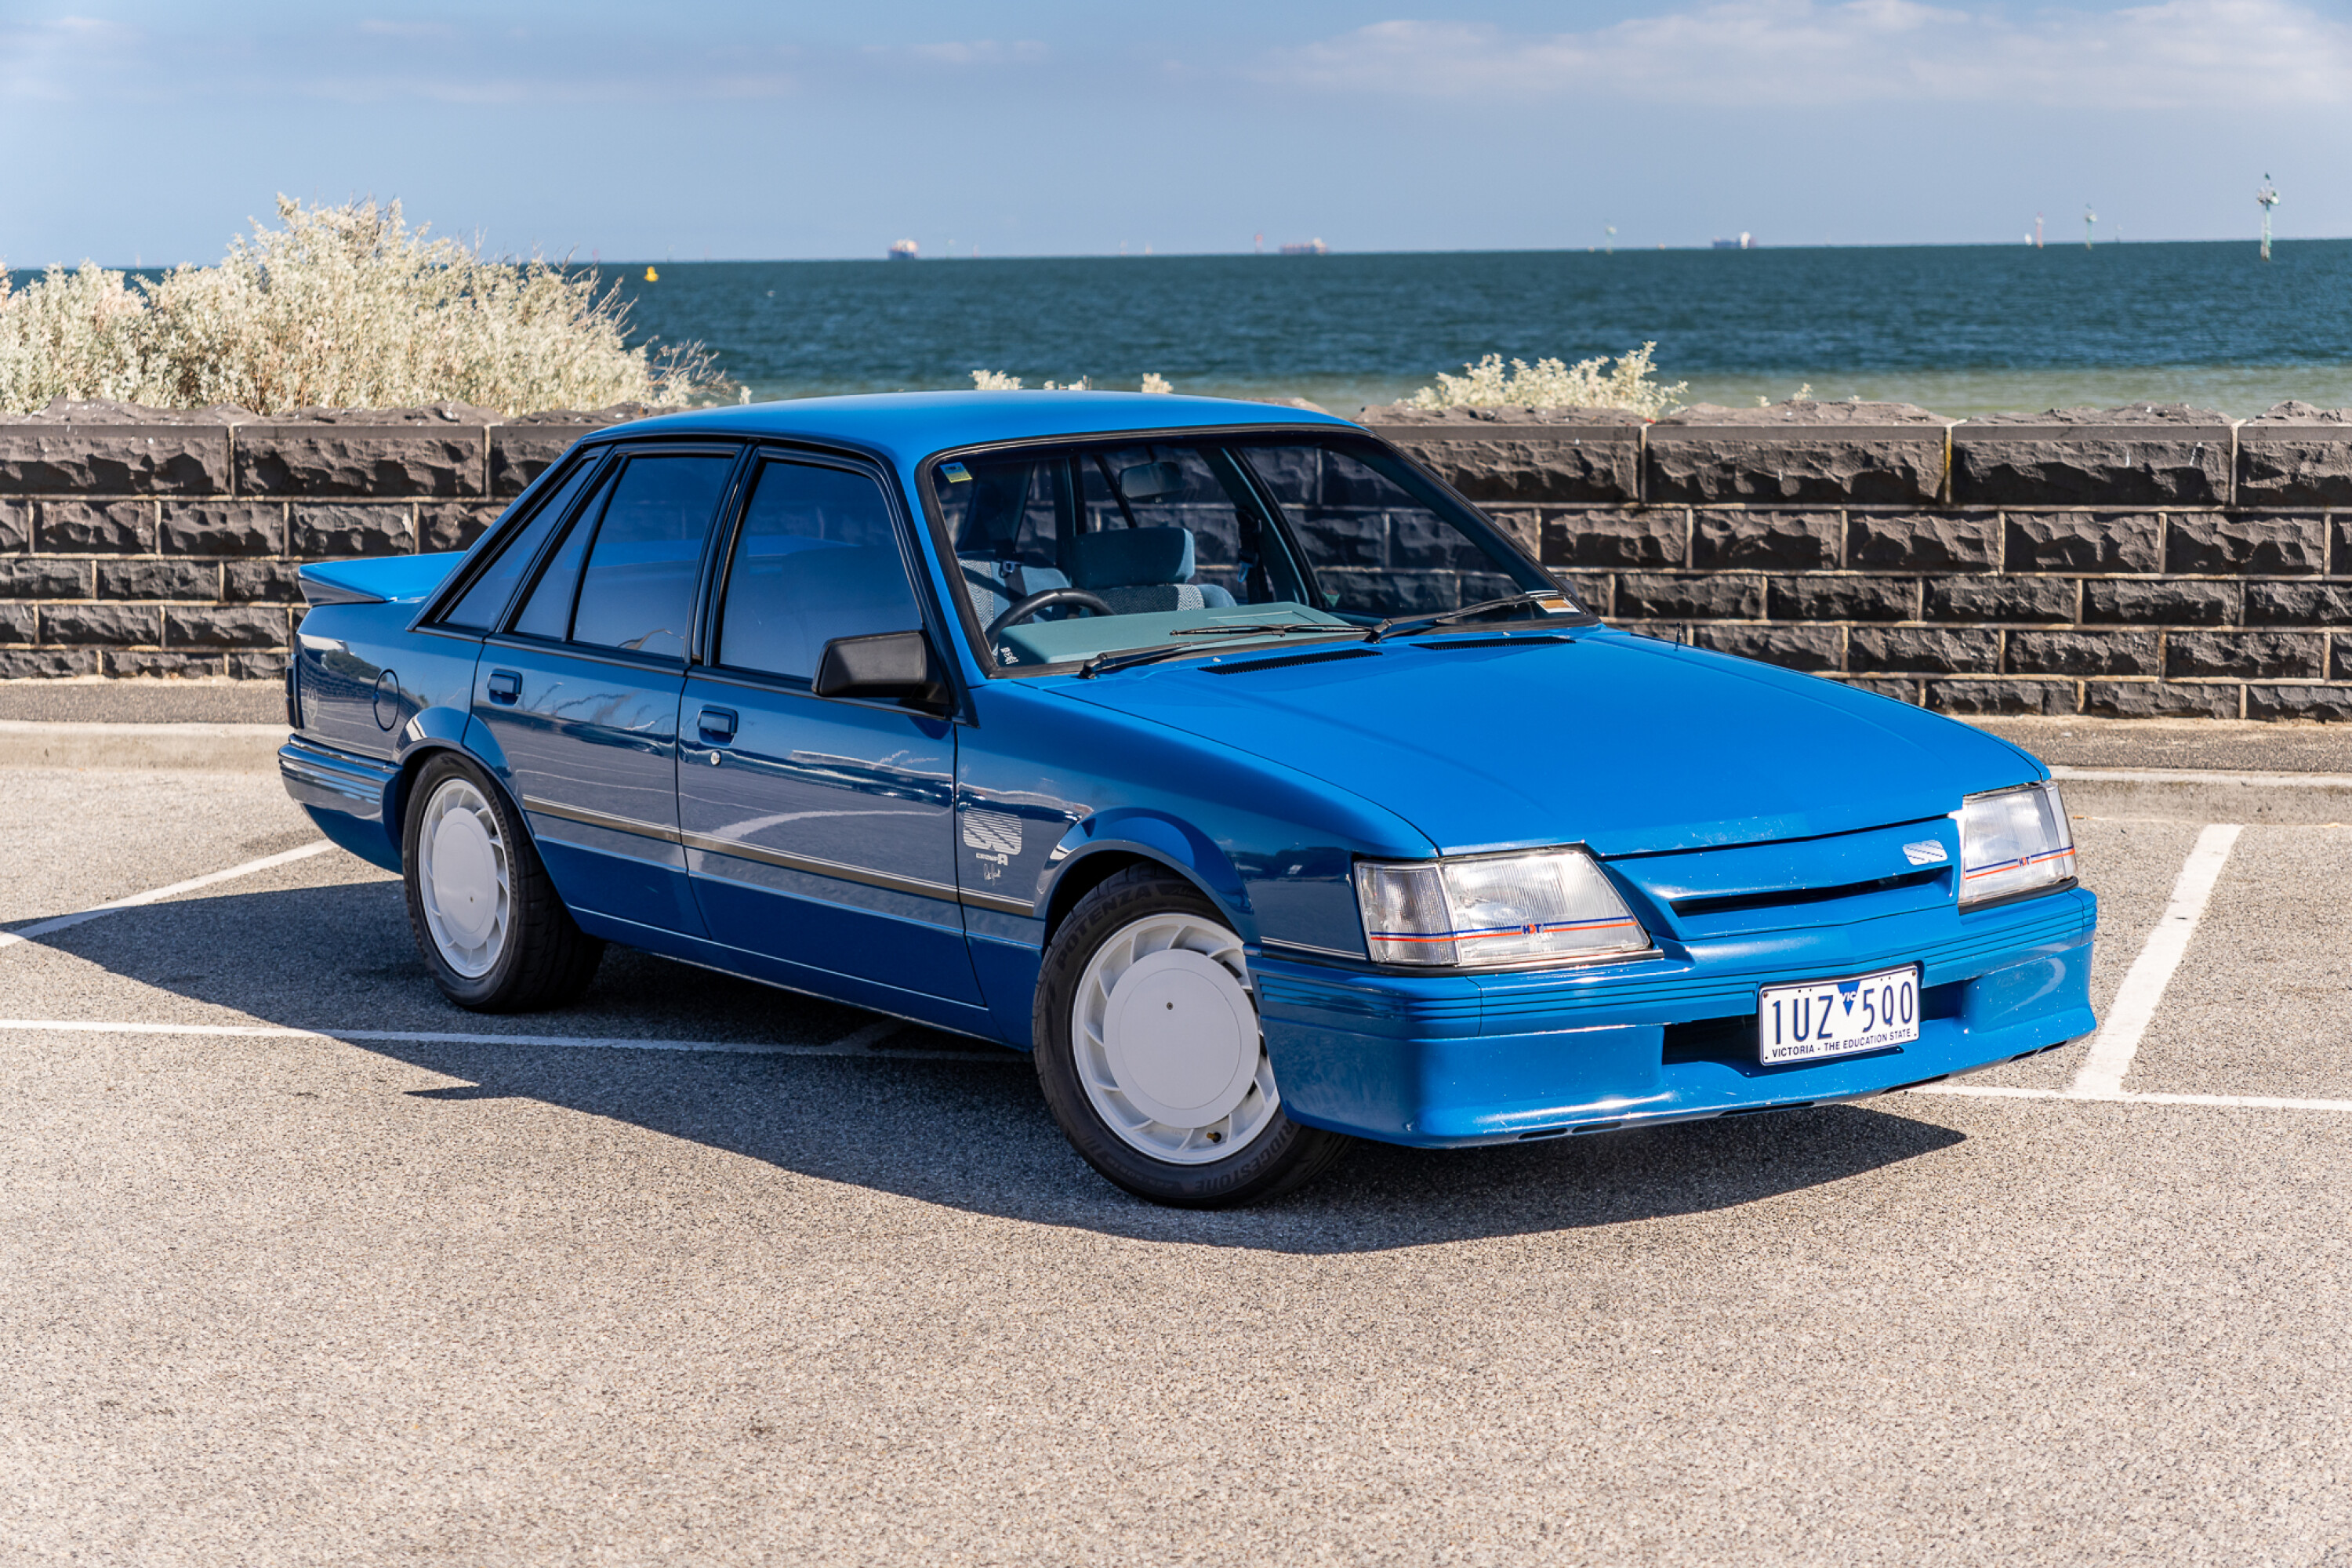 bc071c36/holden commodore hdt vk ss group a brock2 blue meanie jpg